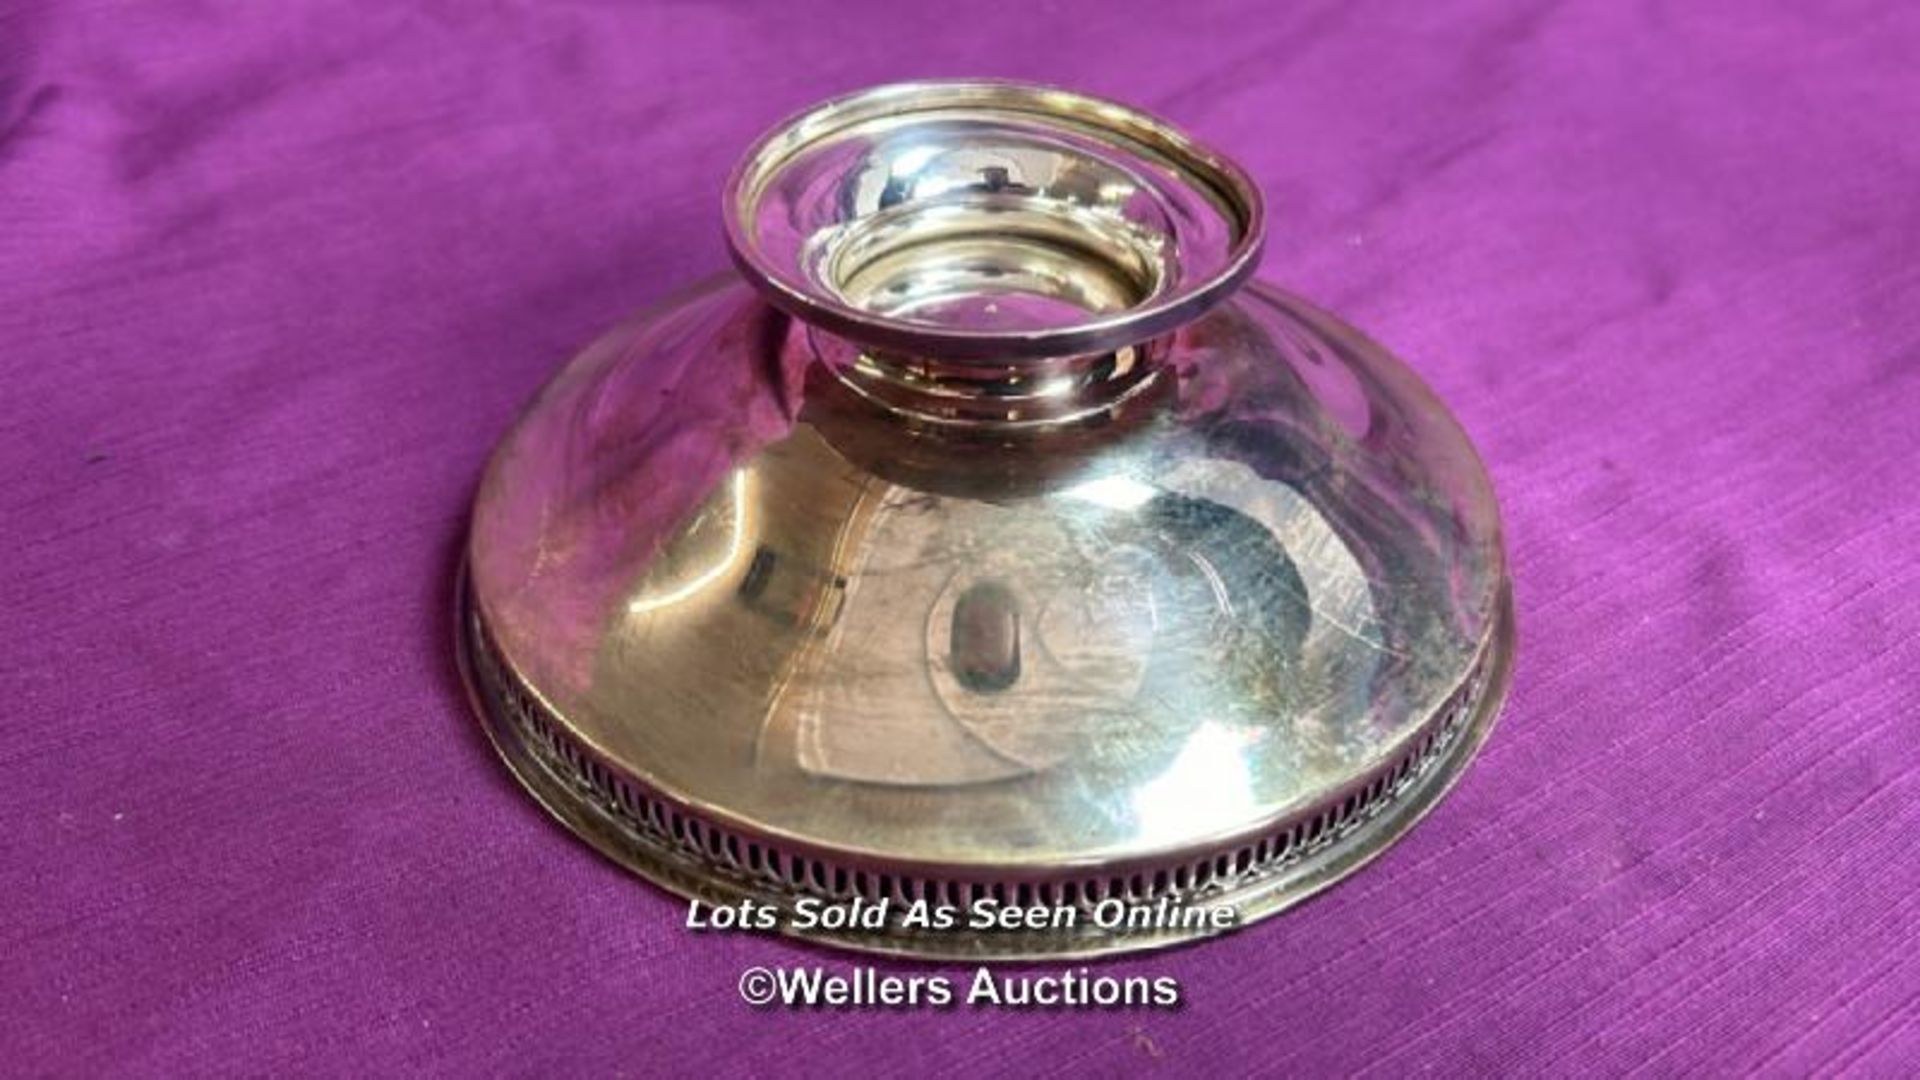 SMALL HALLMARKED SILVER BONBON DISH BY ADIE BROS, DIAMETER 13.5CM, WEIGHT 106GMS - Image 5 of 6